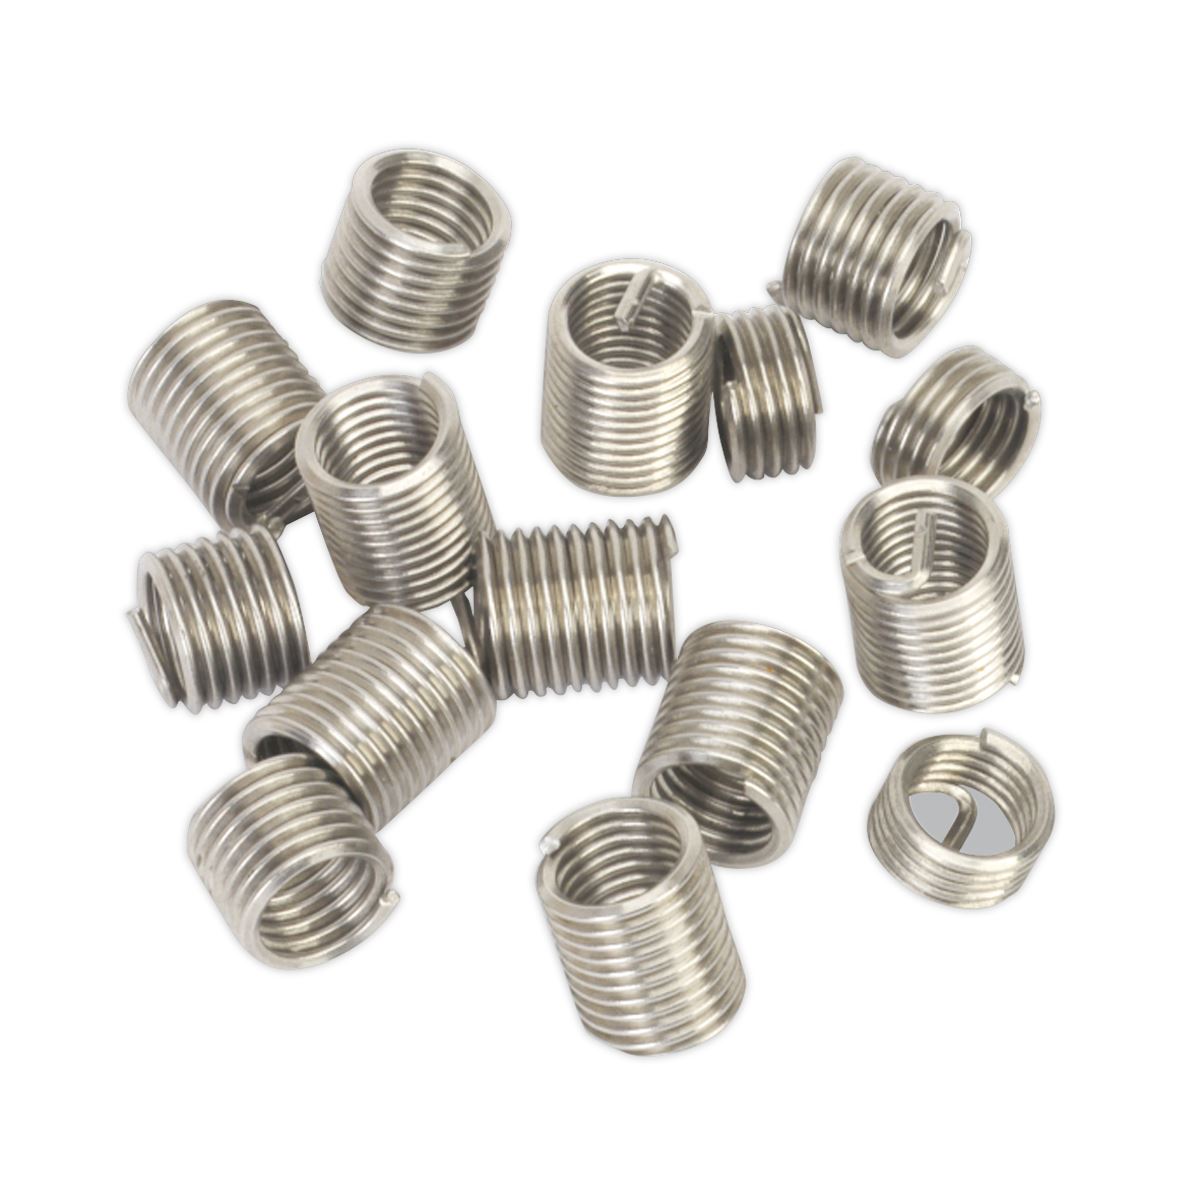 Sealey Thread Insert M12 x 1.75mm for TRM12 Threaded Inserts Helicoil 8 Pack